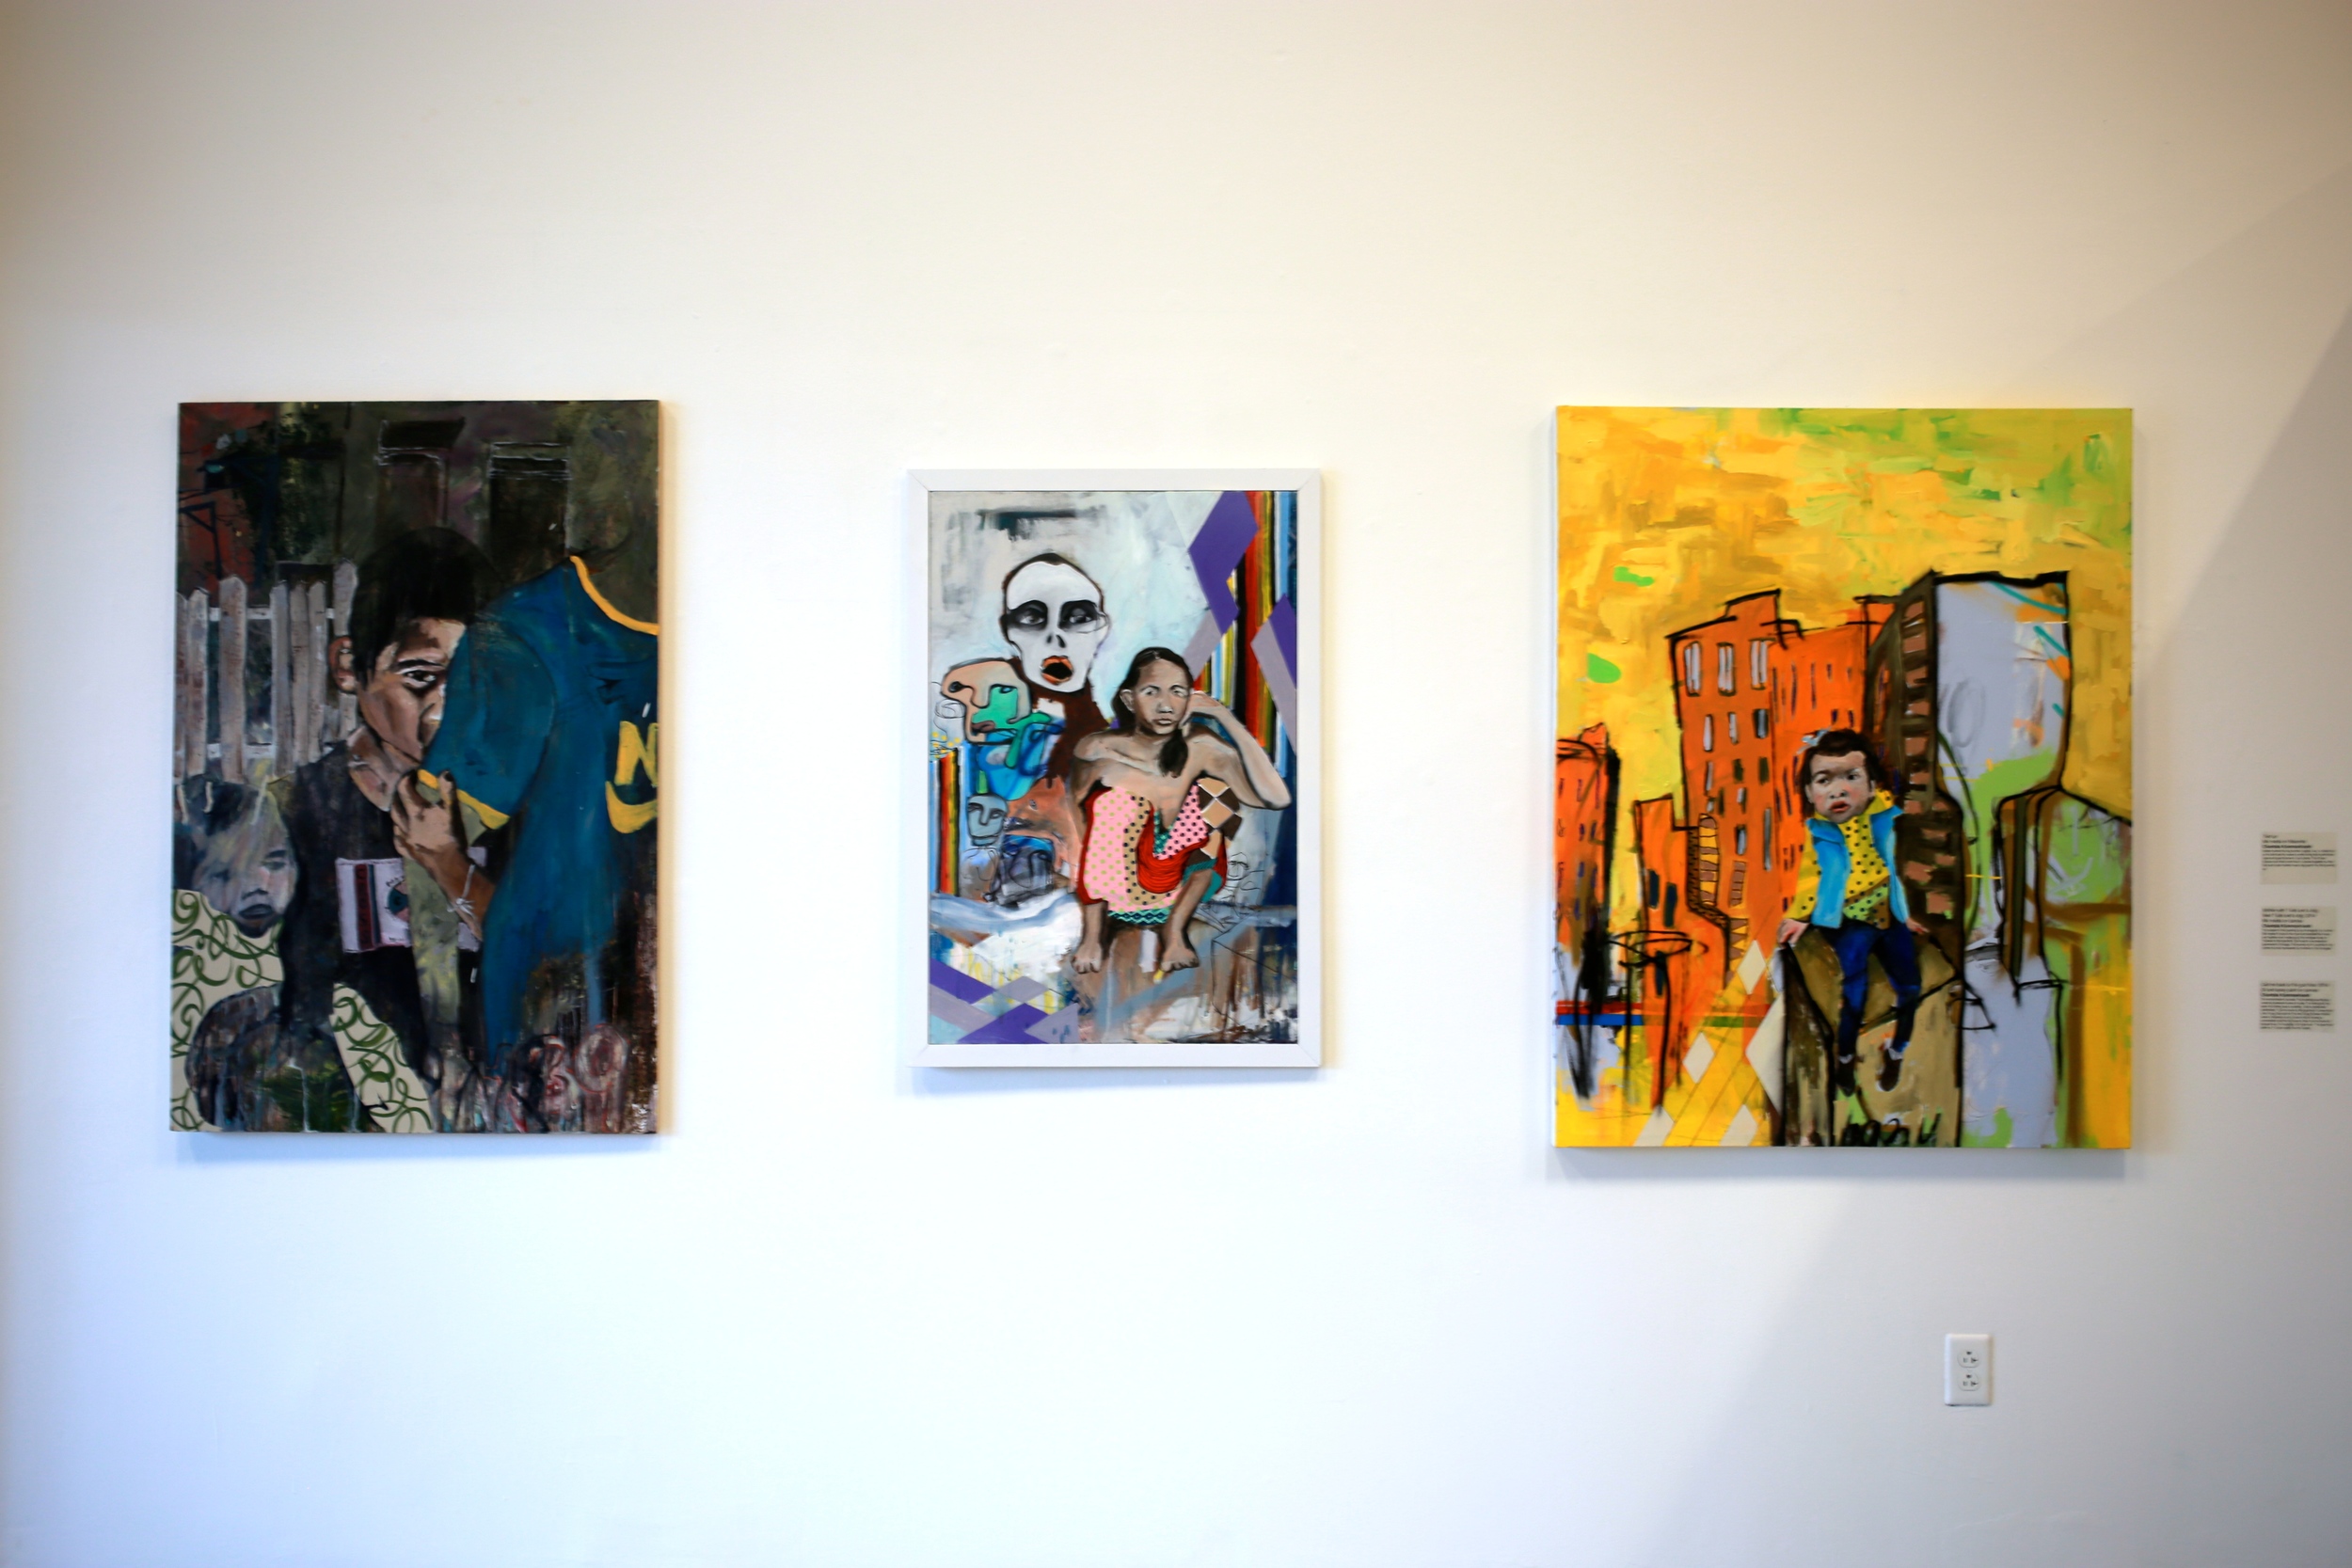 Left to Right: "Tied up", "Mother with 7 kids and a dog, feed 7 kids and a dog, 2014", and "Call me back at the god hour, 2014", mixed media paintings by Chantala Kommanivanh